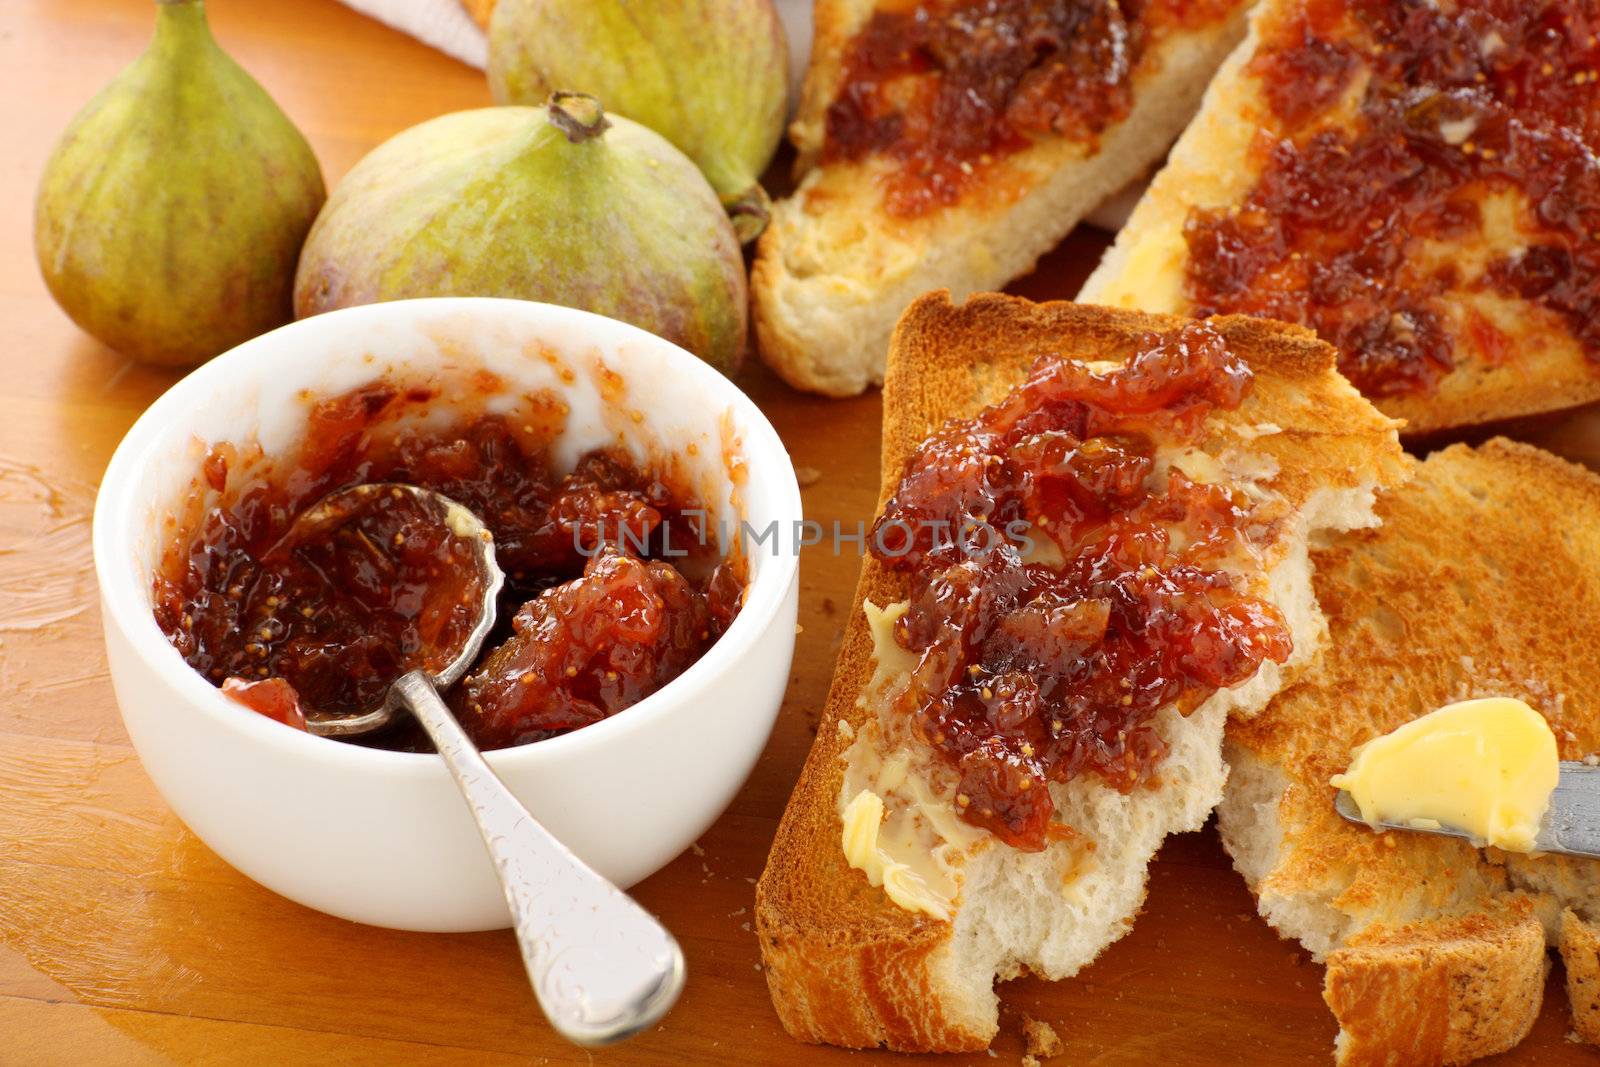 Rustic homemade fig jam sandwiches on toast ready to serve.